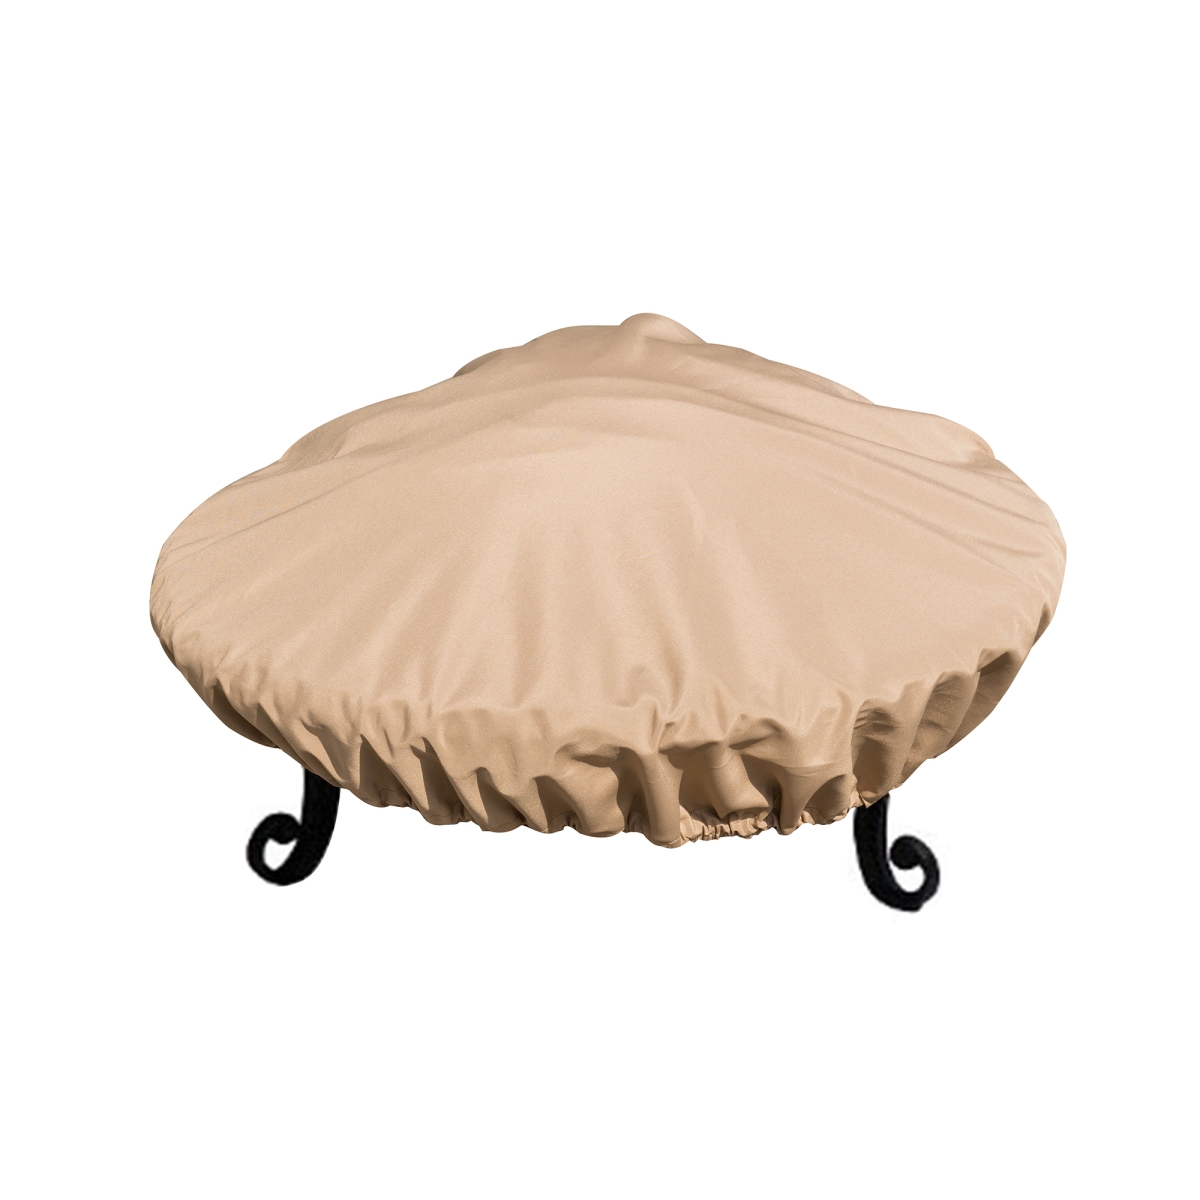 Nu570-32 29 - 32 In. Sandstone Fire Pit Cover For Fire Pits, Tan